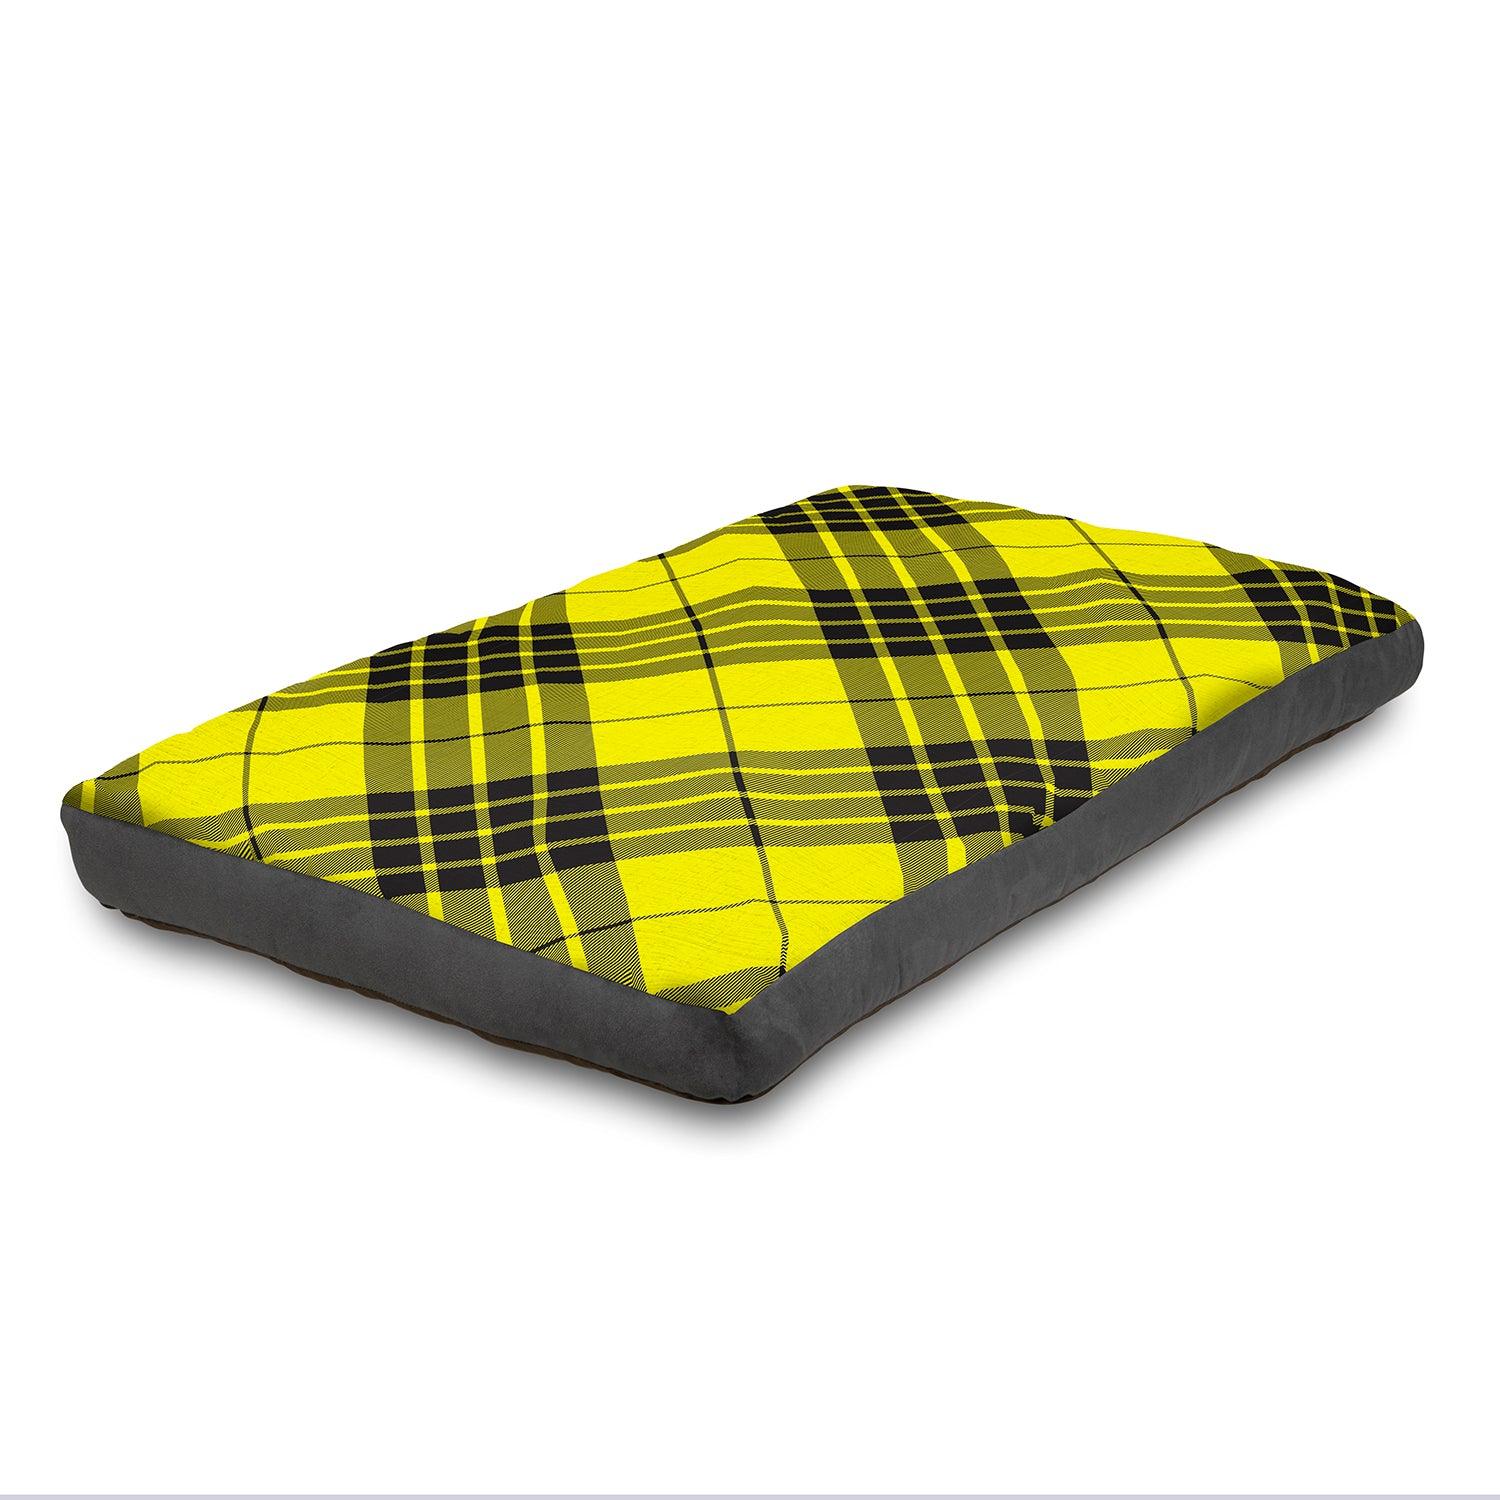 View Super Comfy Dog Bed Soft and Fluffy with Washable Cover Large 125 cm x 85 cm Yellow information